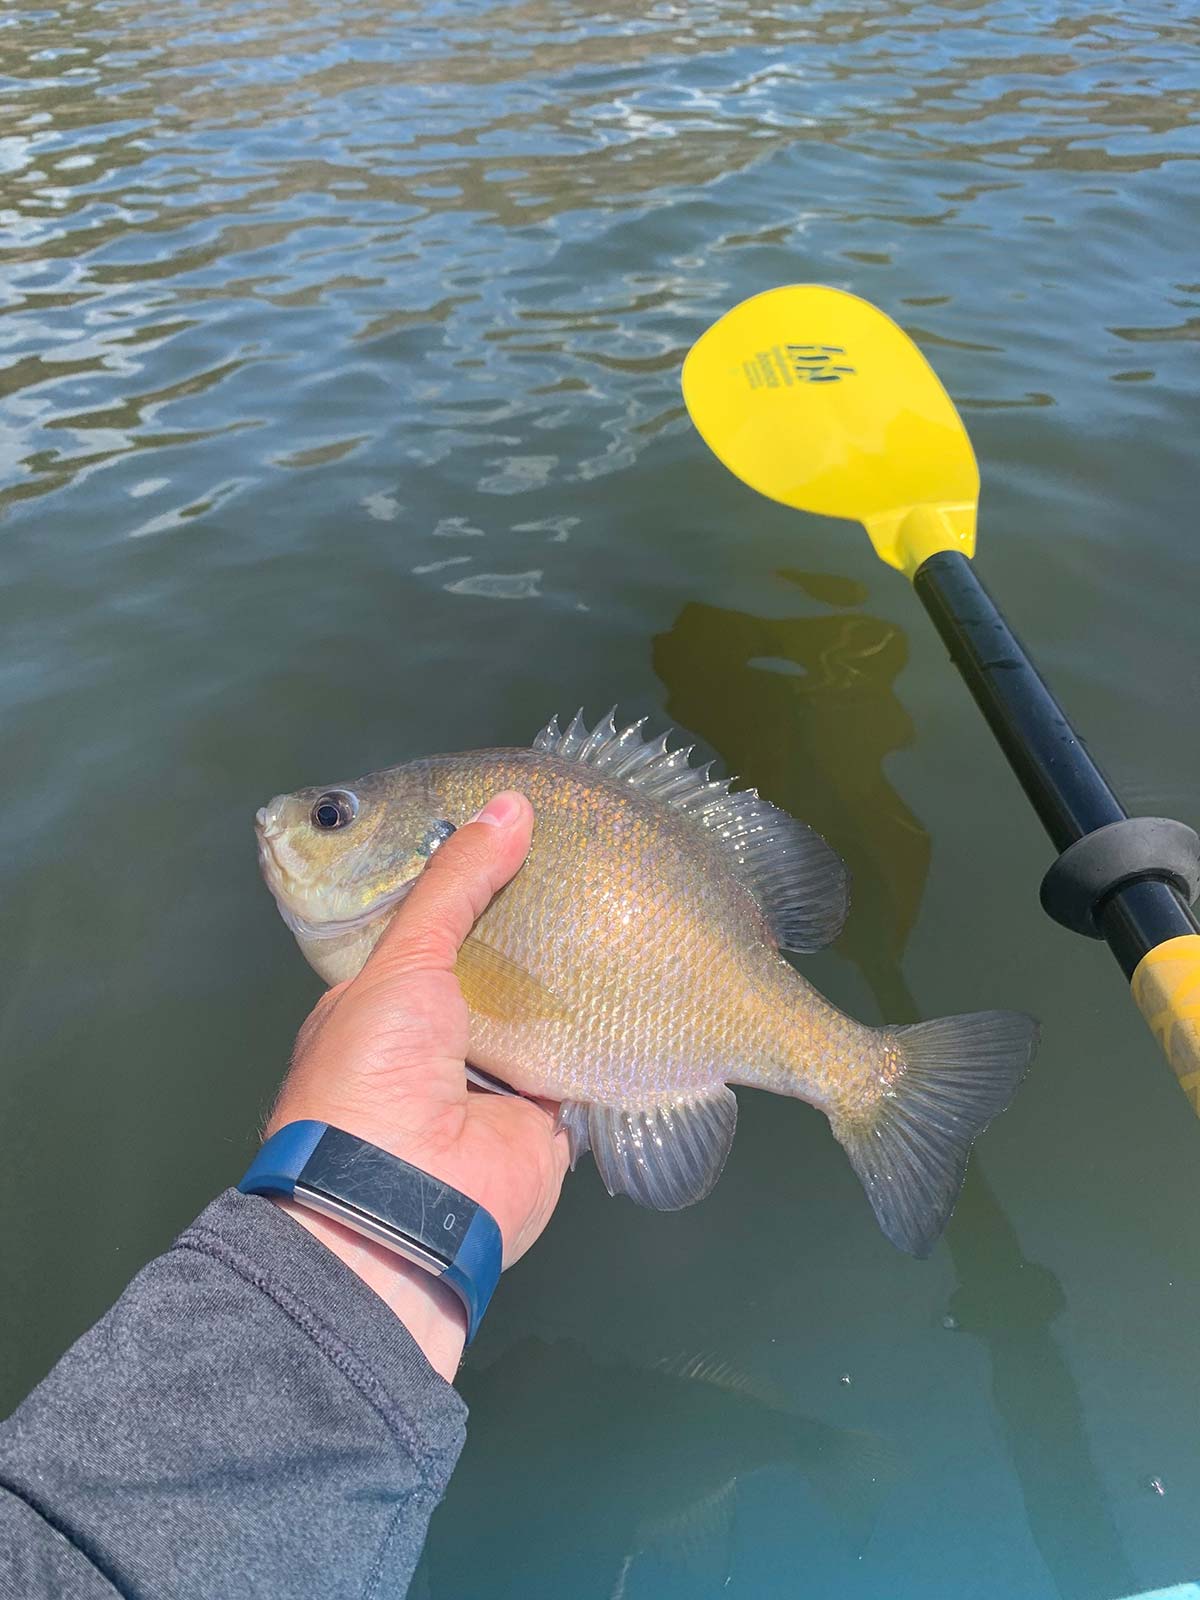 How To Fish From Your Kayak Standing Up (Cool Paddle Trick